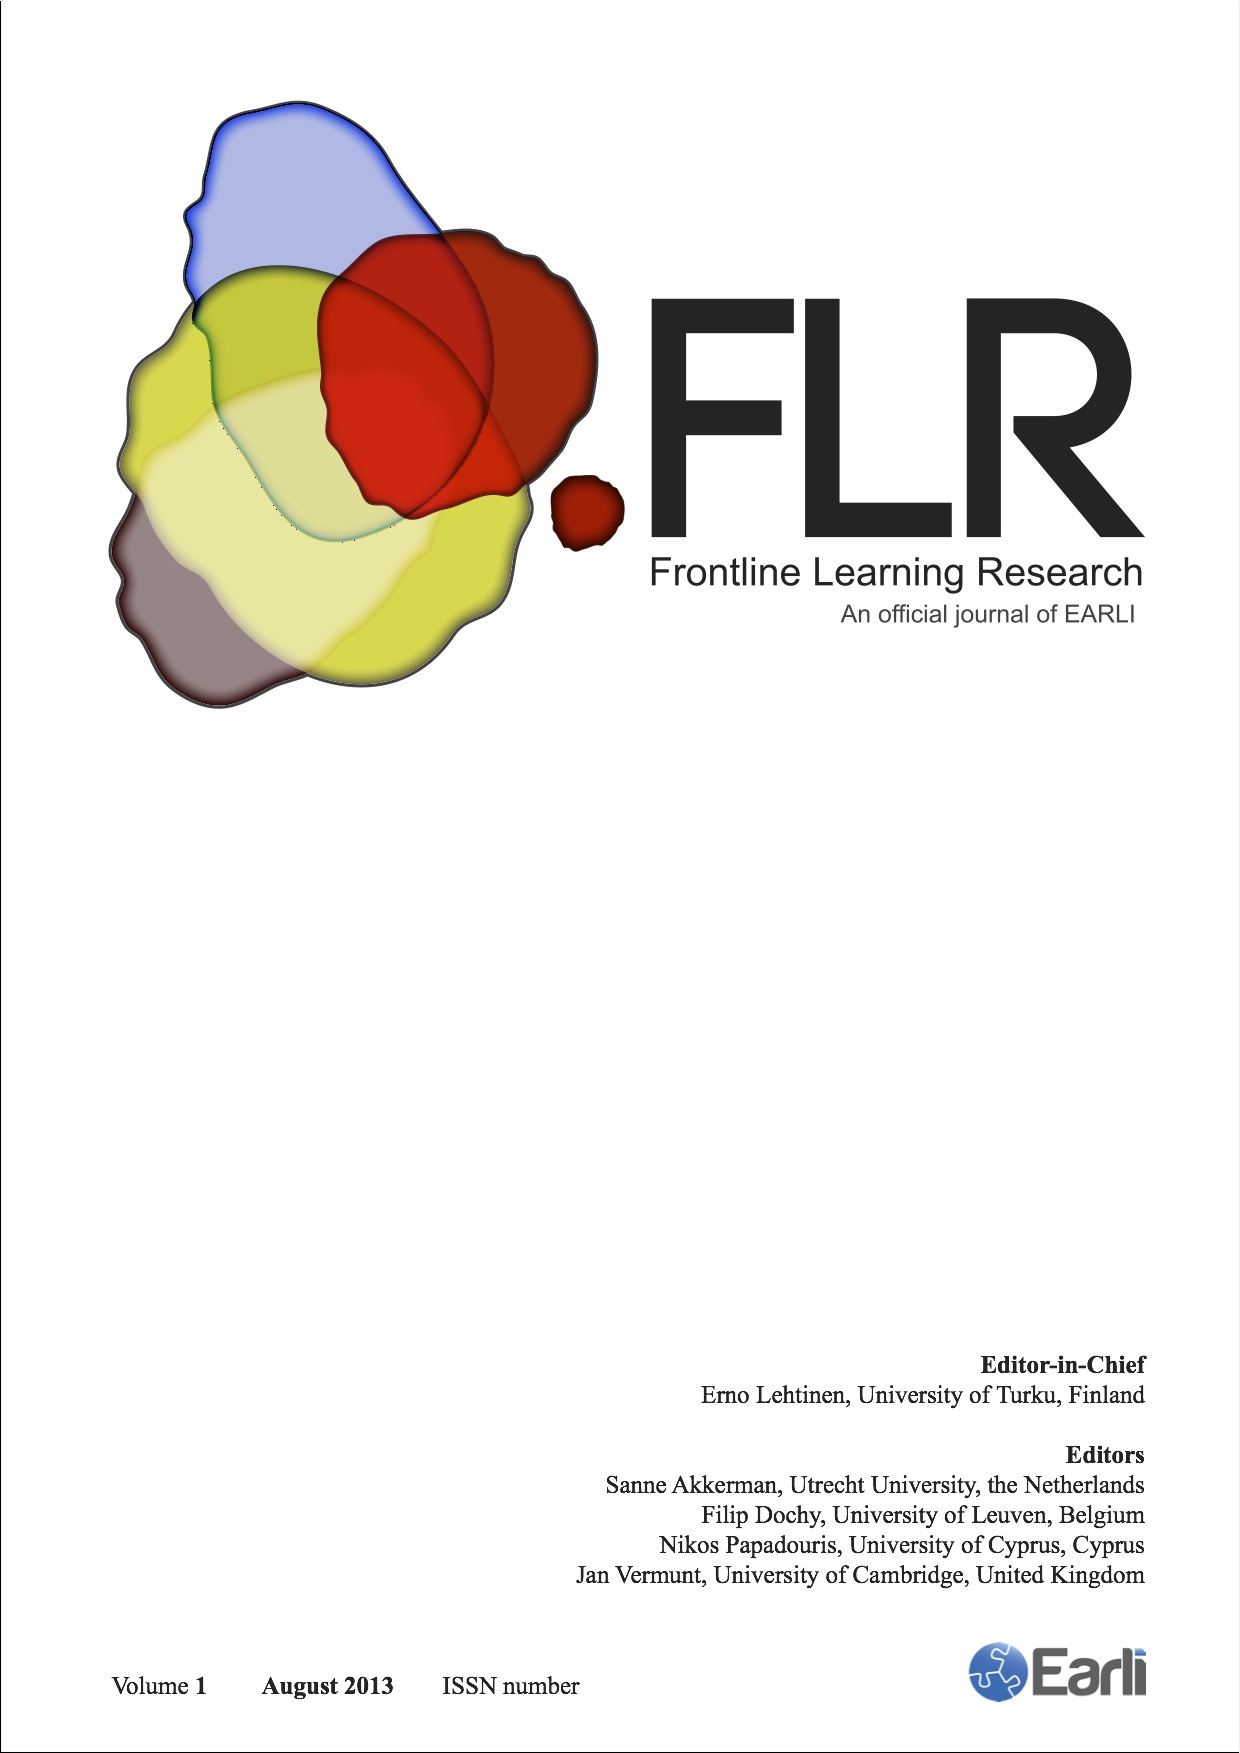 FLR Cover Volume 1 Issue 1